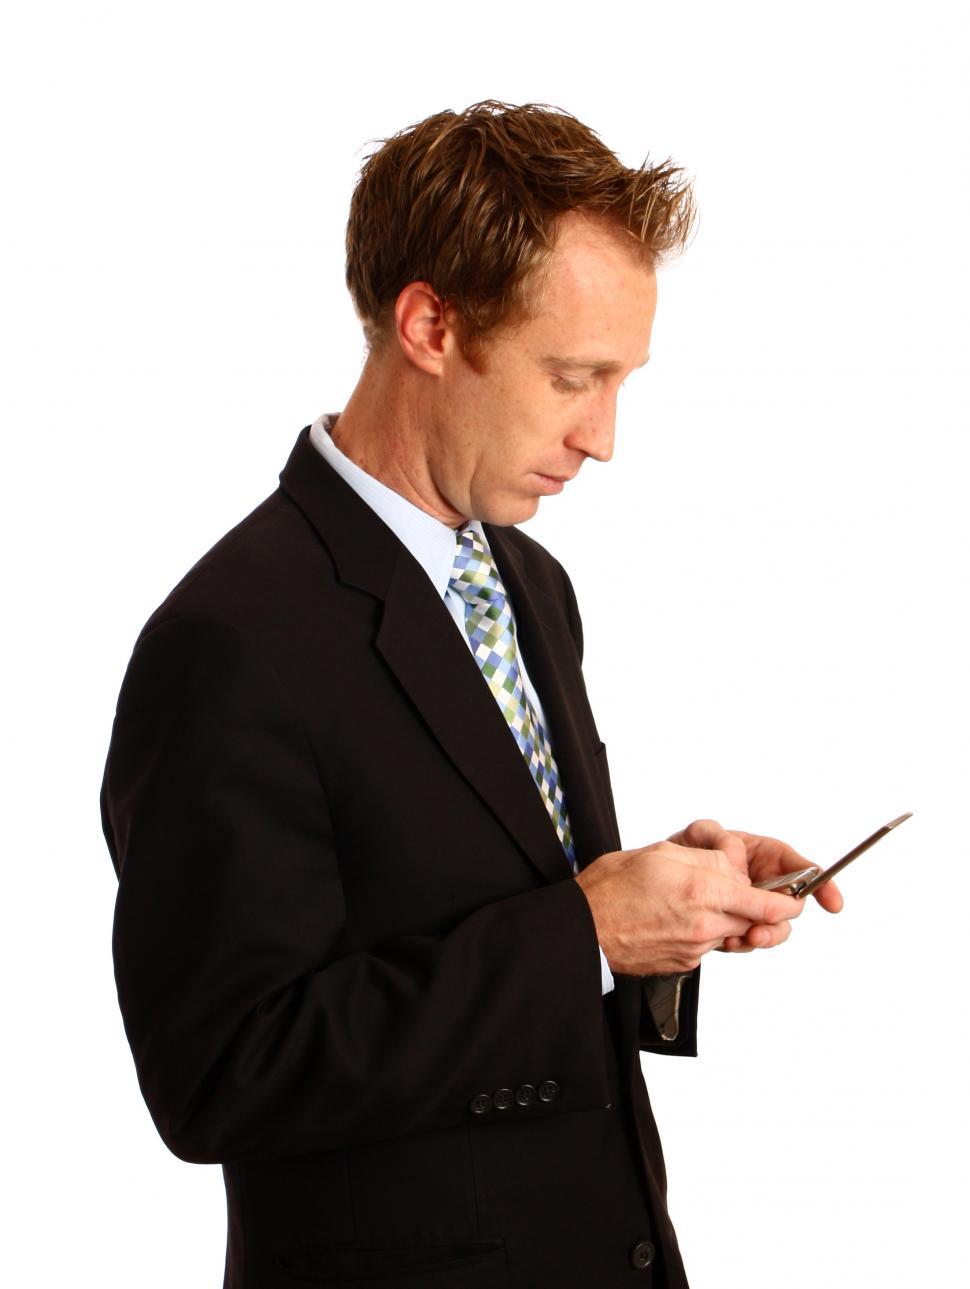 Free Image of A young businessman texting on a cell phone 